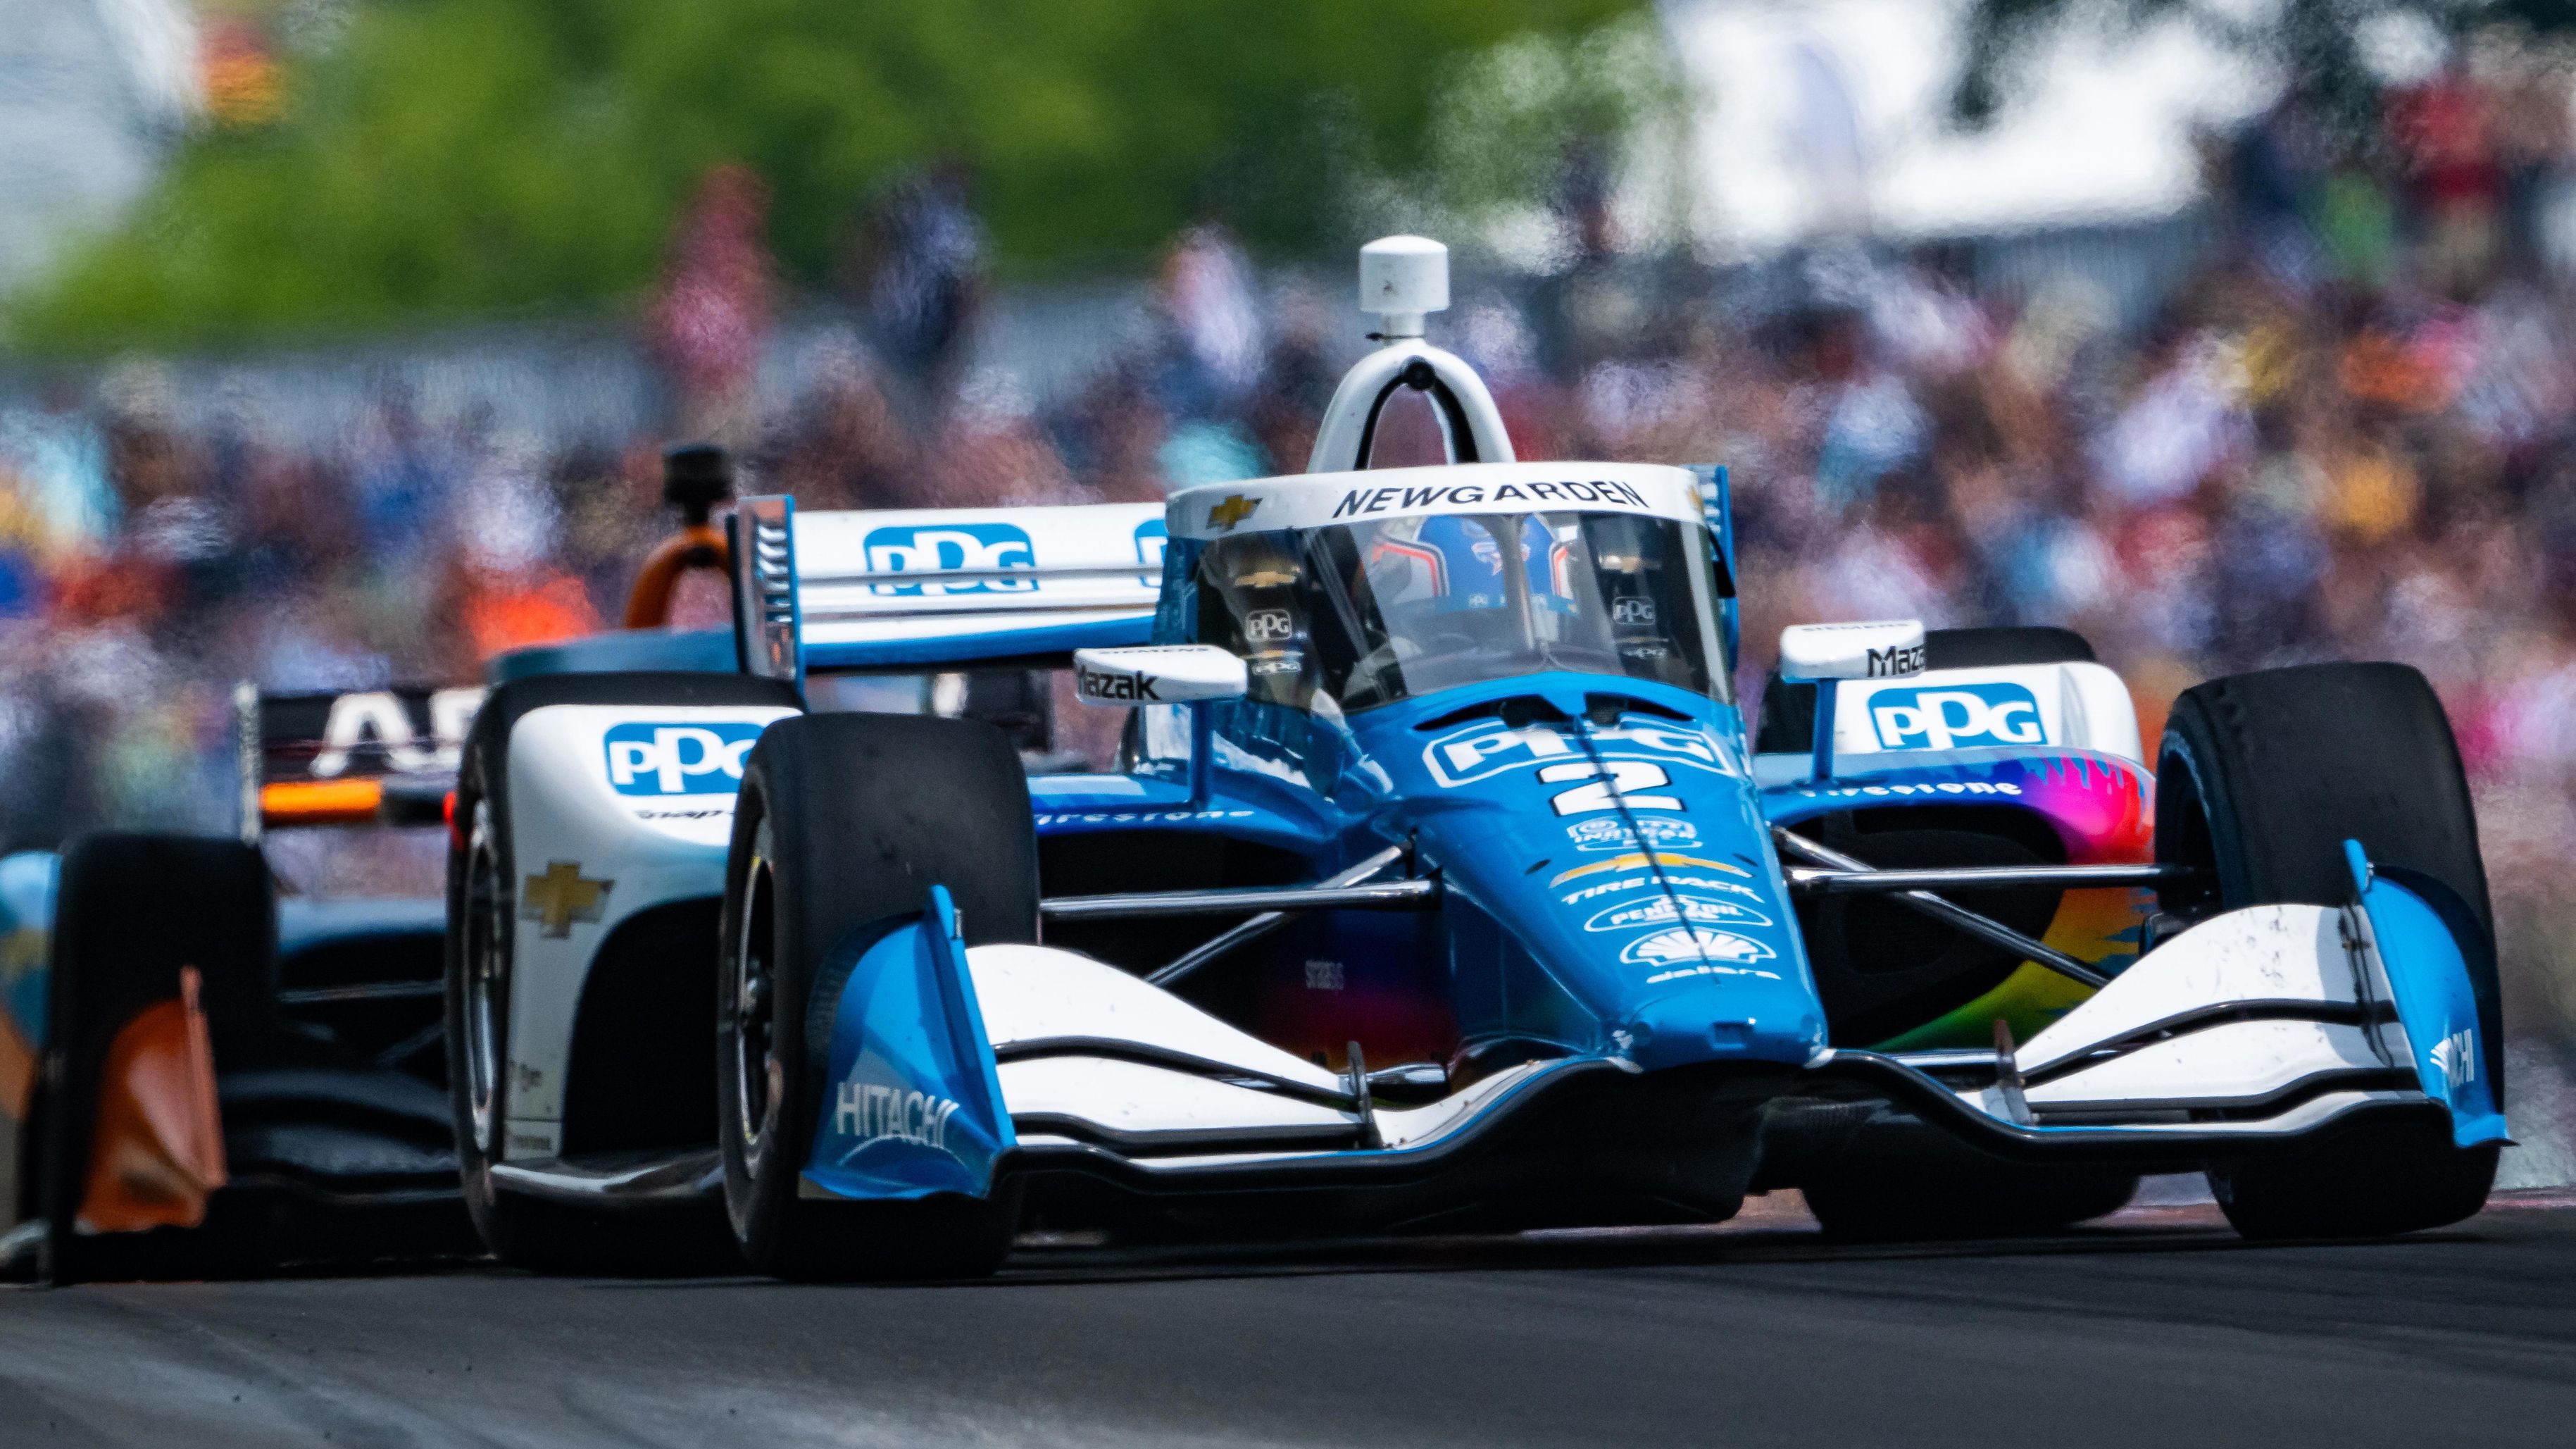 Josef Newgarden sits third in the IndyCar Series after eight races.